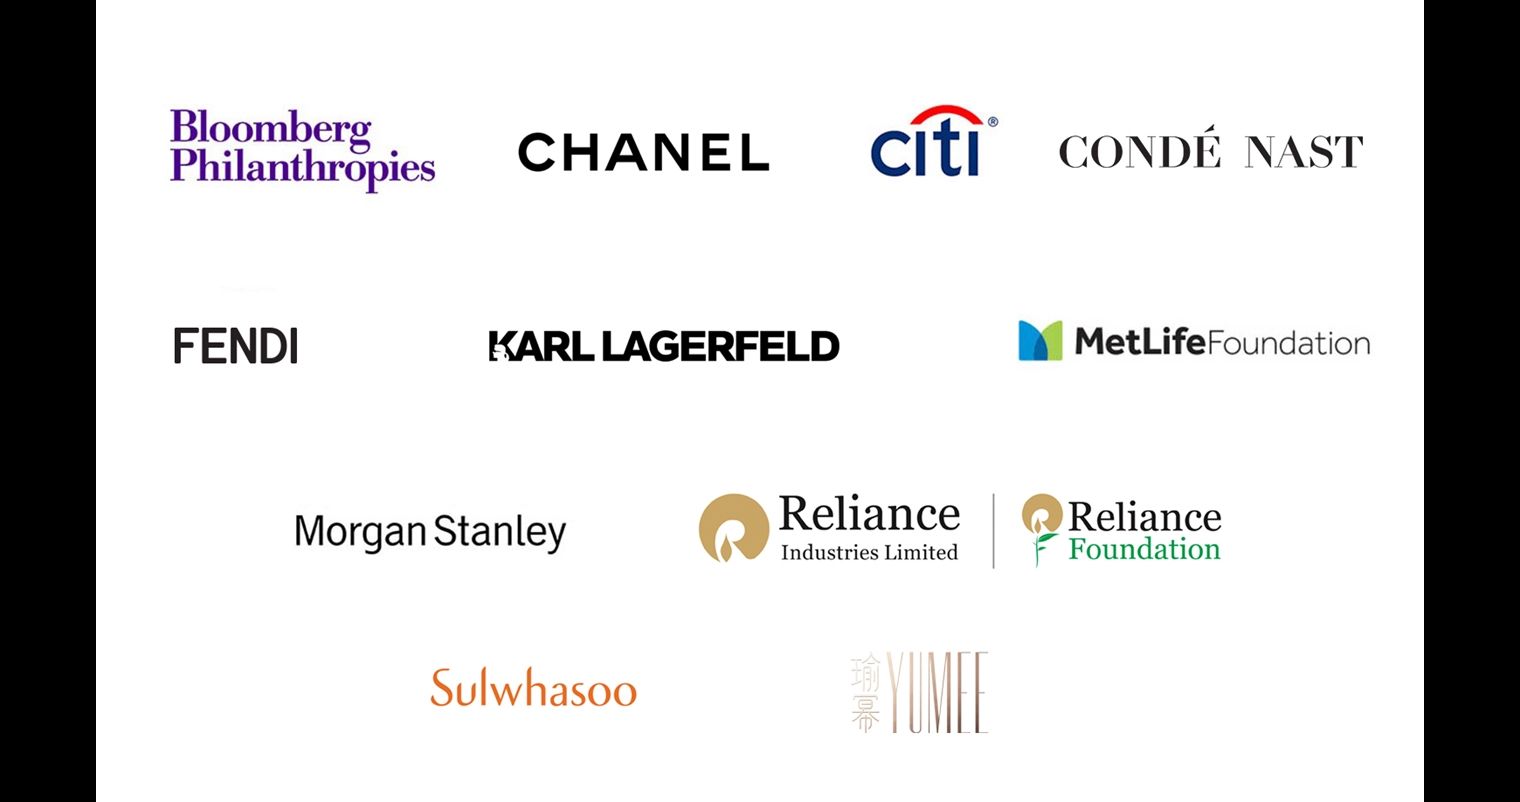 "Logos of corporate sponsors such as Bank of America, Bloomberg Philanthropies, Citi, Conde Nast, Louis Vuitton, MetLife Foundation, Morgan Stanley, and Reliance Foundation."